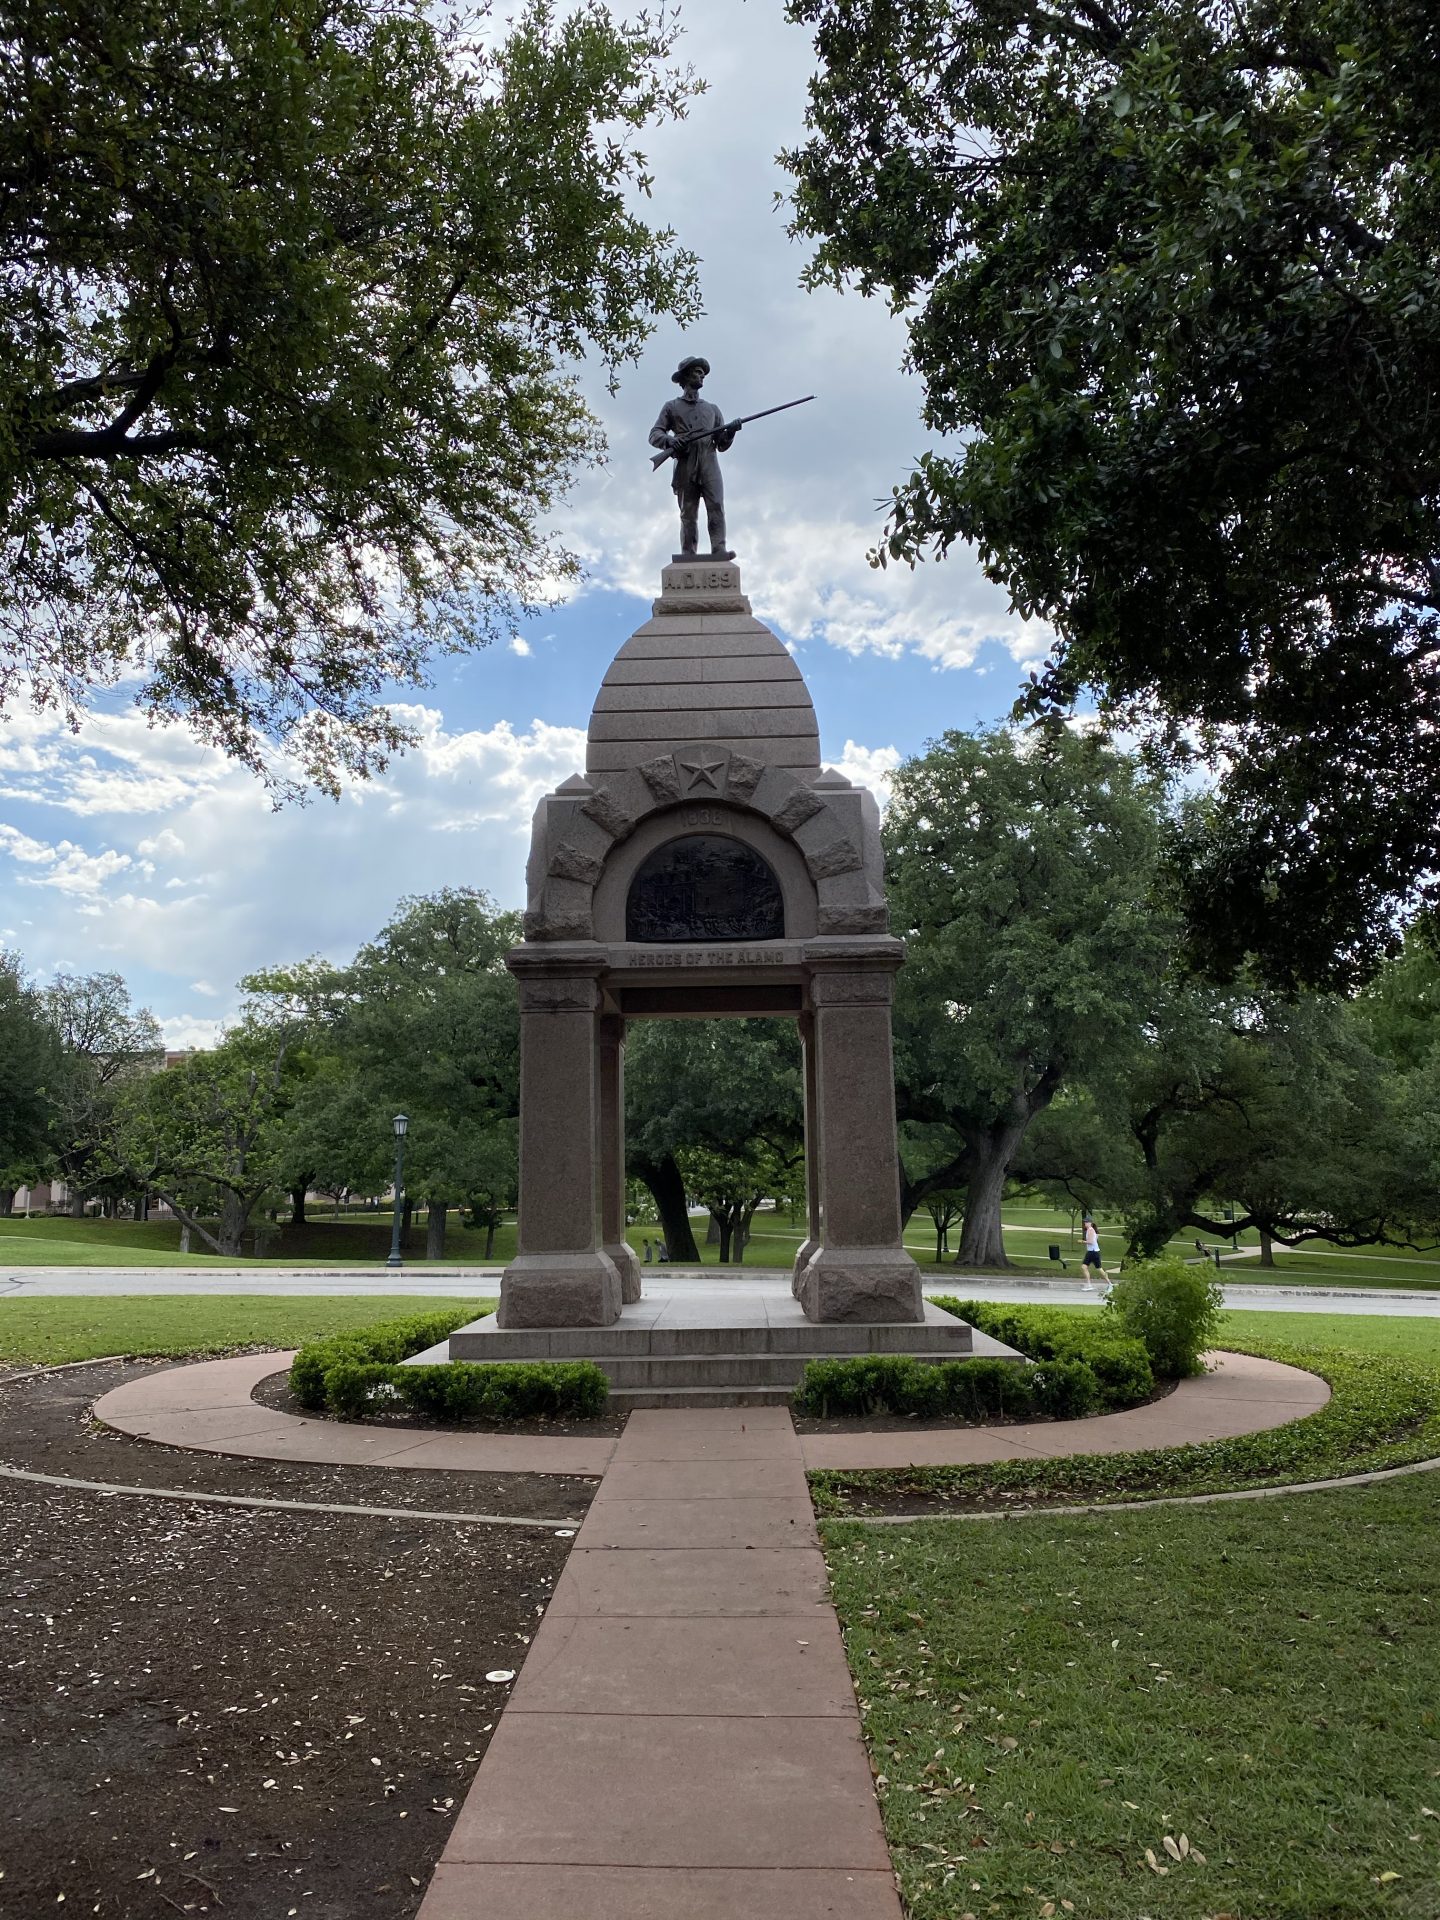 File:Texas Ranger Statue and Texas Capitol Dome.JPG - Wikimedia